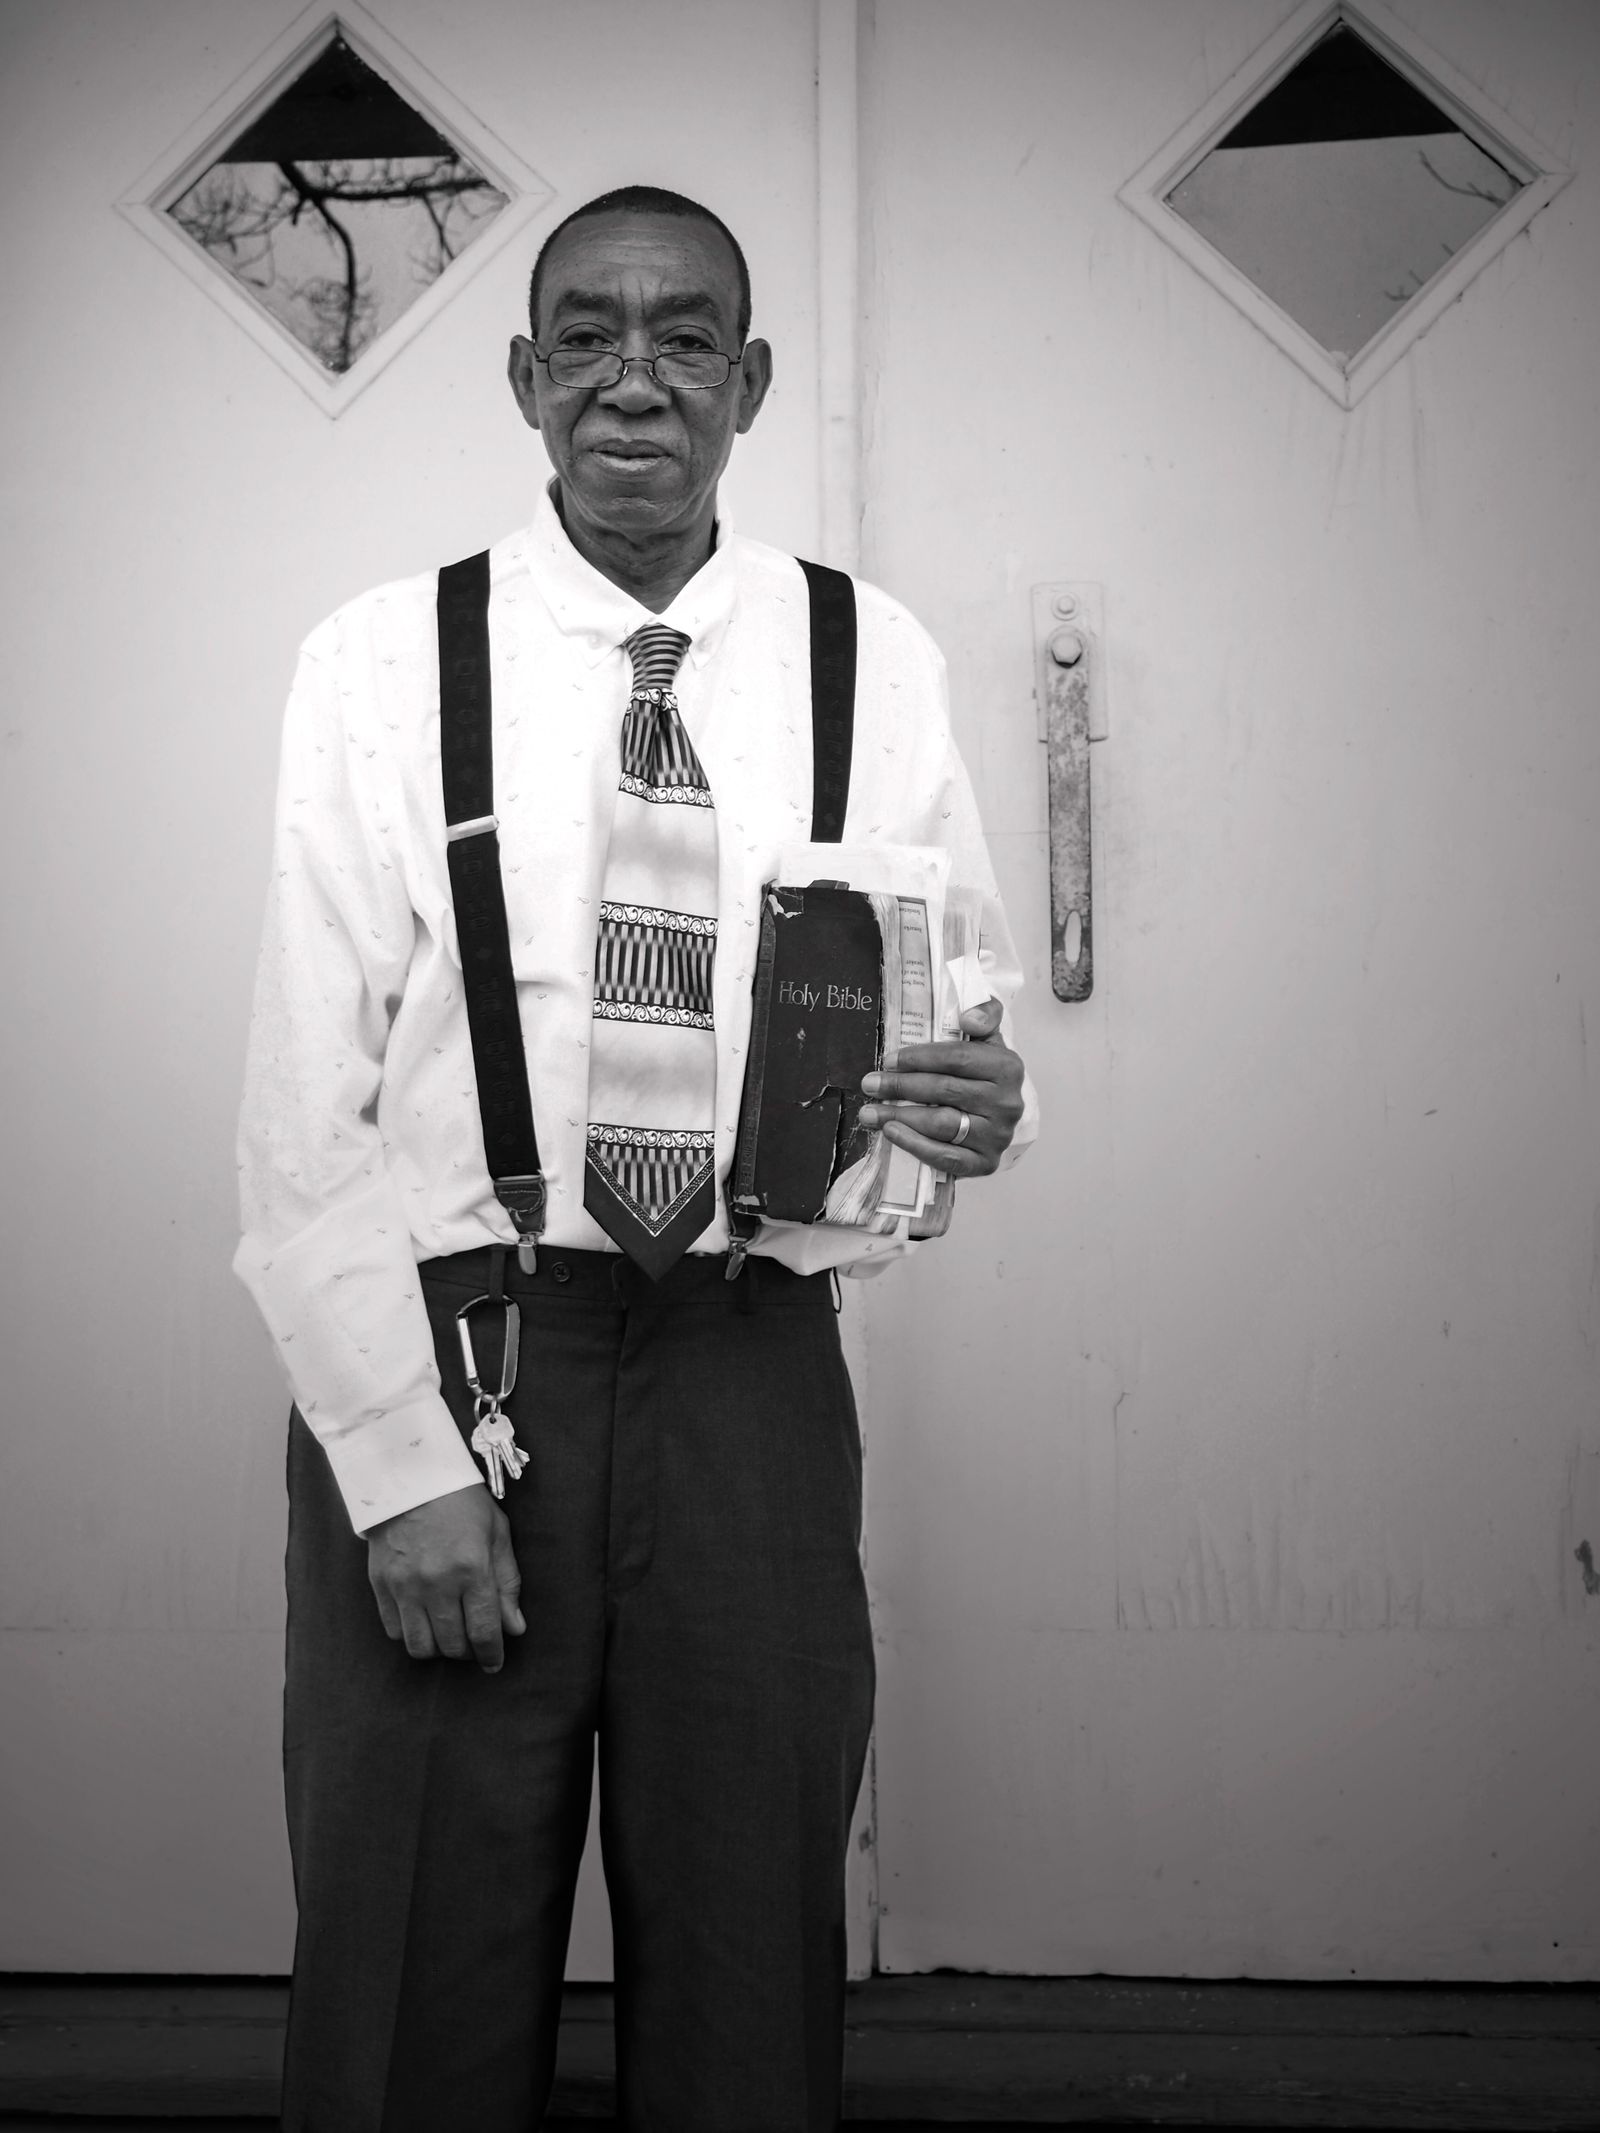 © Rebecca Moseman - Preacher Man. Mr. Hoover, the local preacher of the Mt. Zion church stand outside the church doors after the Sunday service.